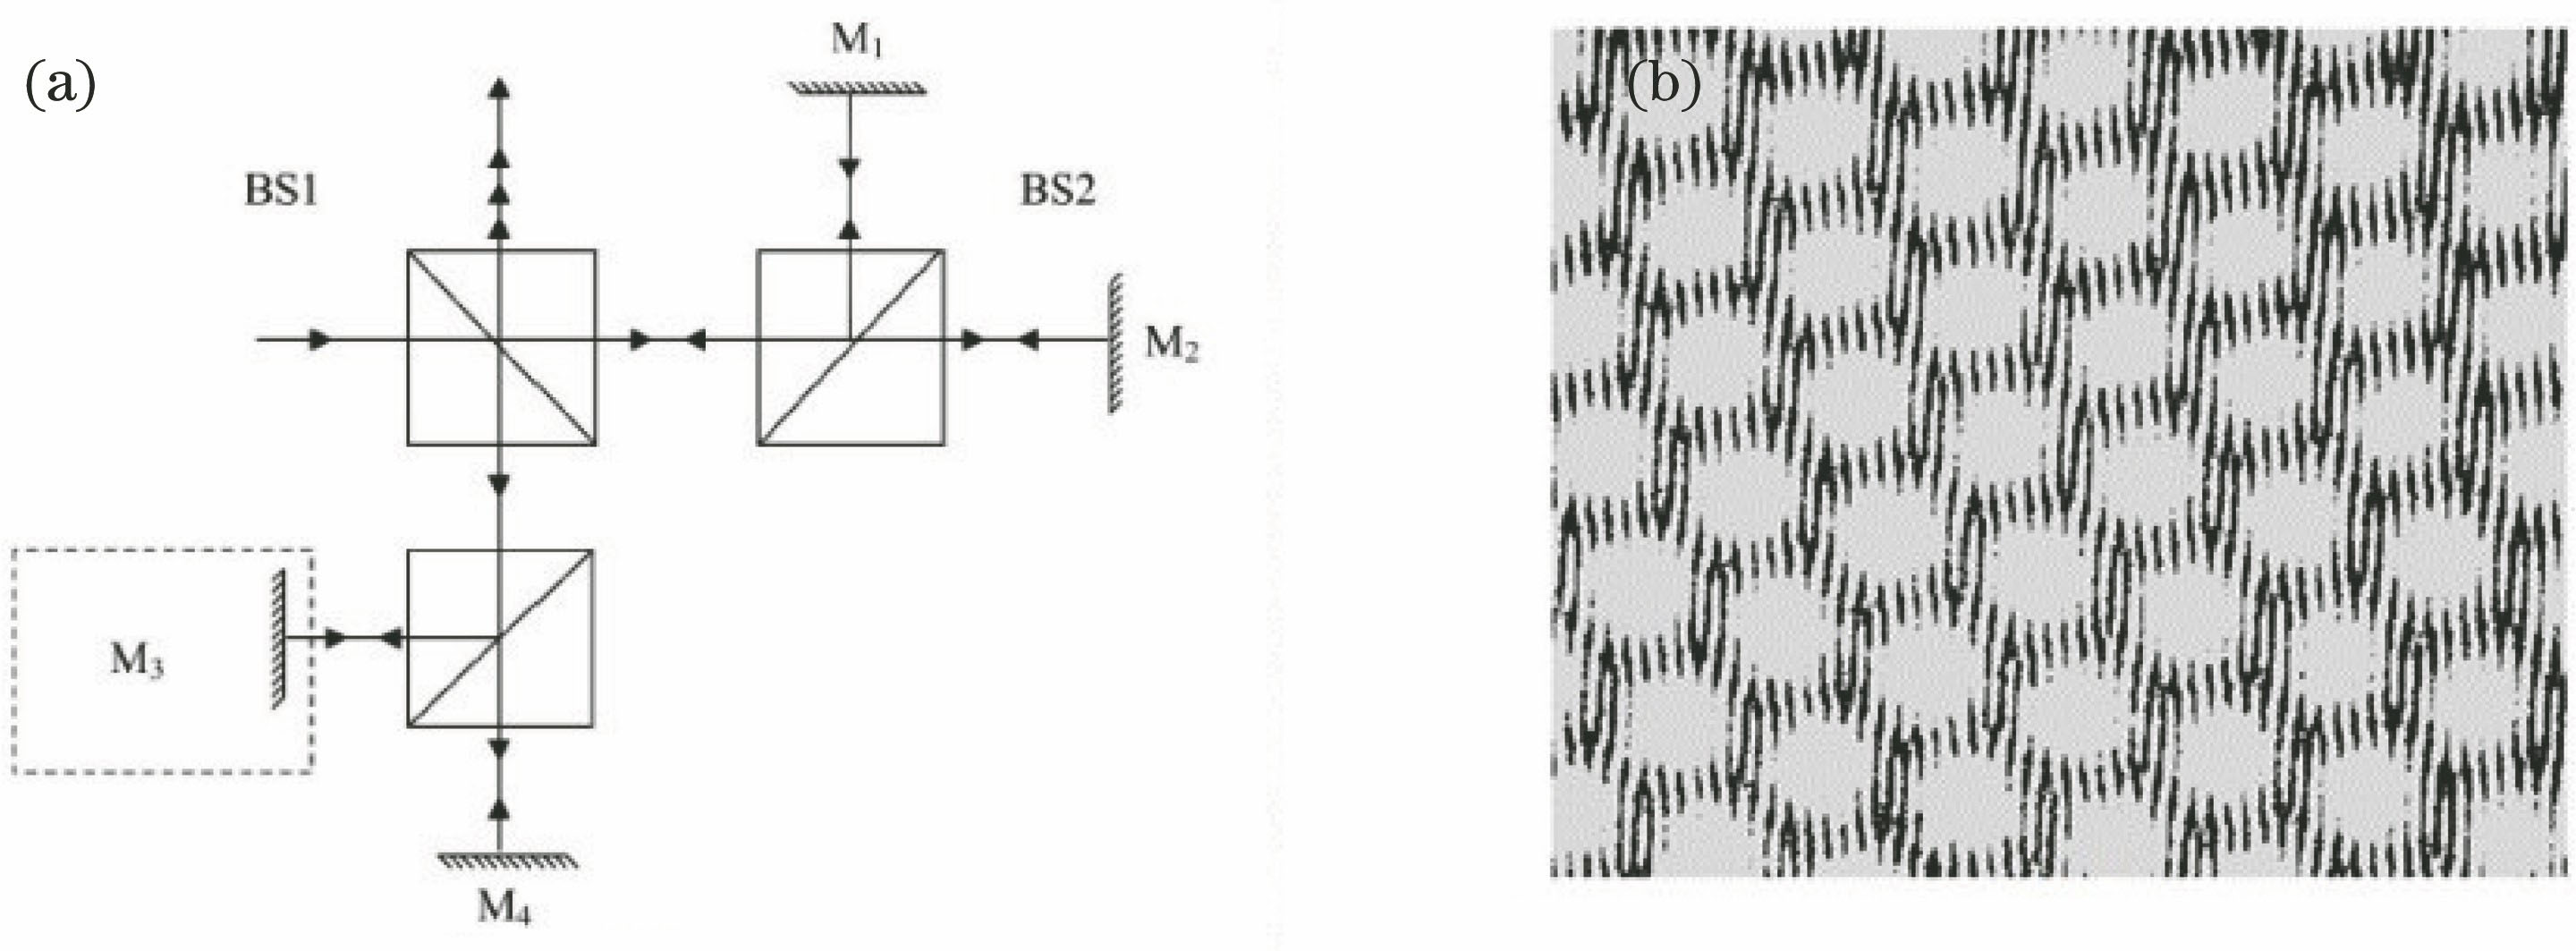 Experimental diagram and interference fringe pattern of Michelson interferometer[26]. (a) Diagram of Michelson interferometer; (b) fork fringe pattern